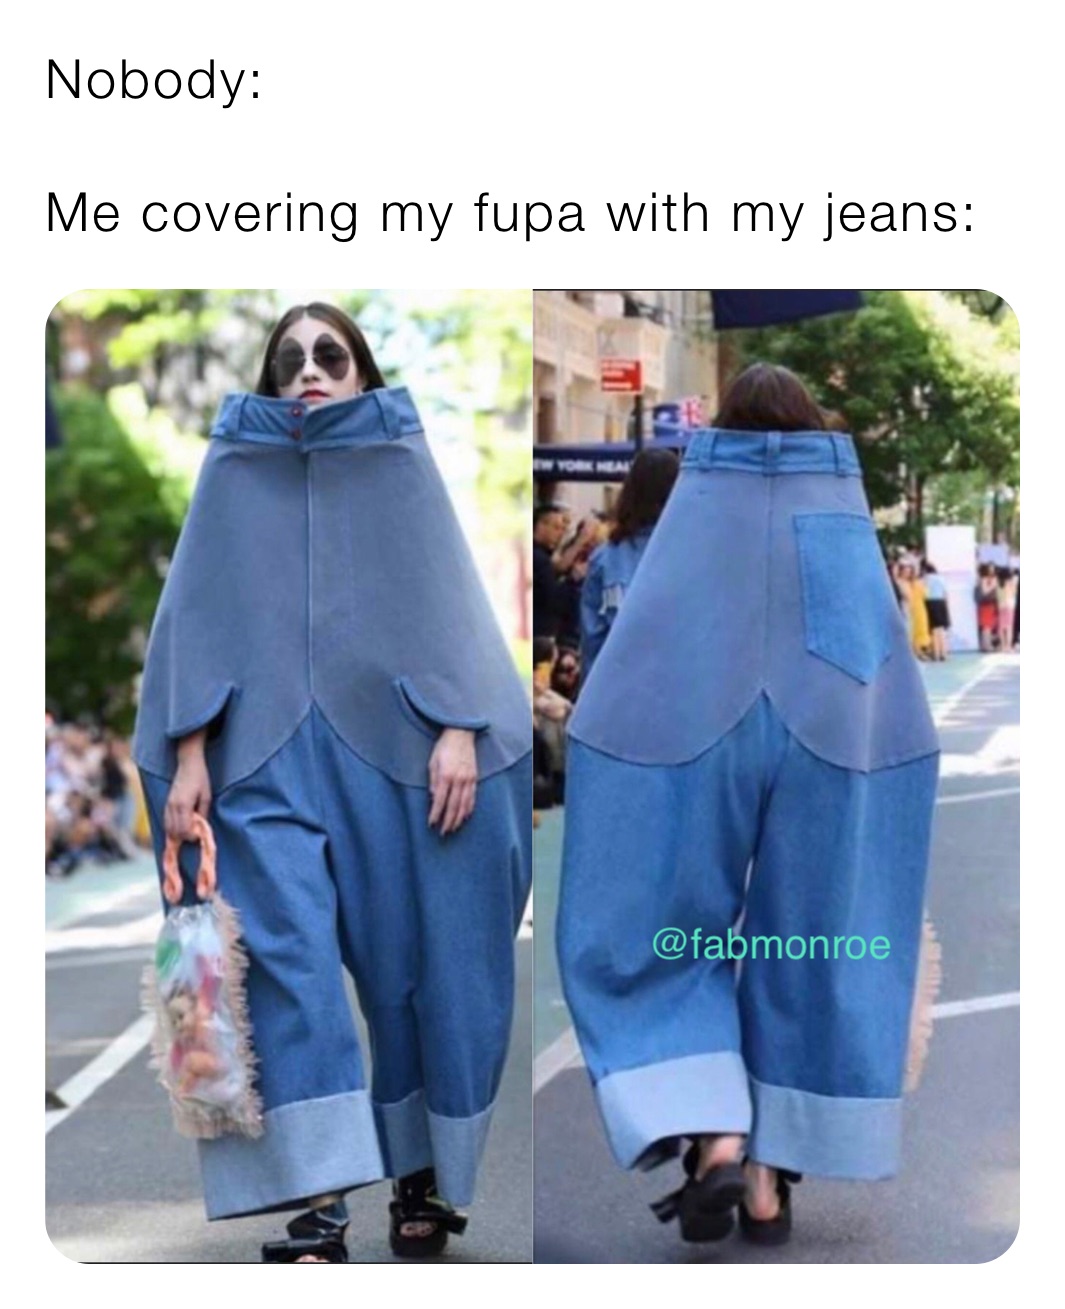 Nobody: Me covering my fupa with my jeans:, @mrz_outlaw21